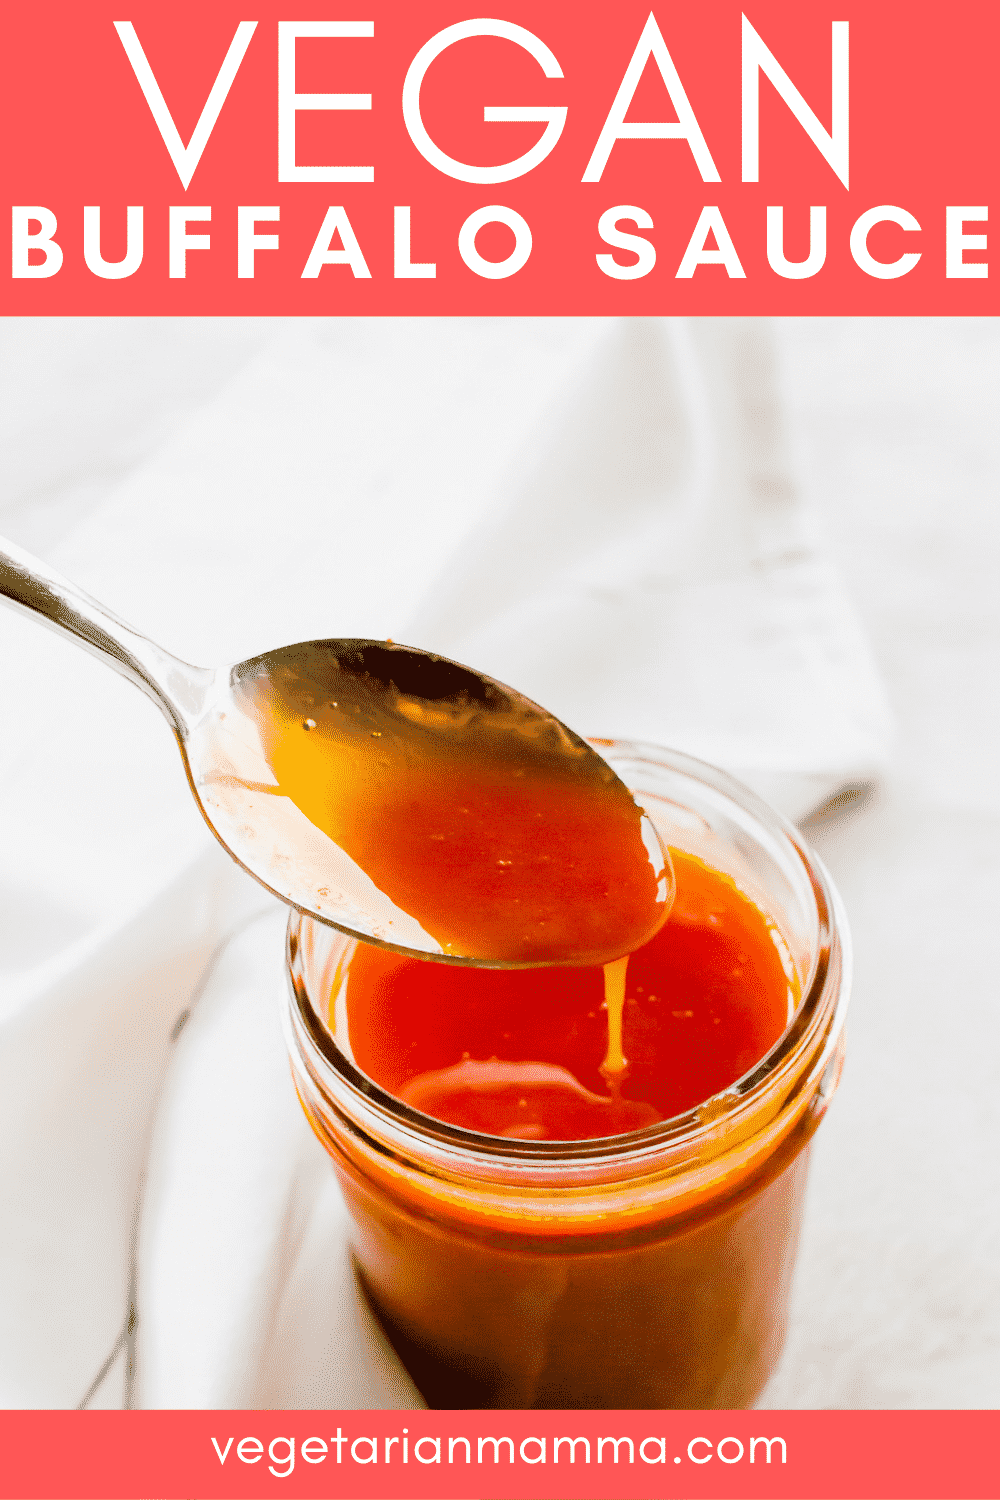 Vegan Buffalo Sauce is so luscious with a spicy kick! You only need 5 ingredients to whip up this simple homemade buffalo sauce in just a few minutes.